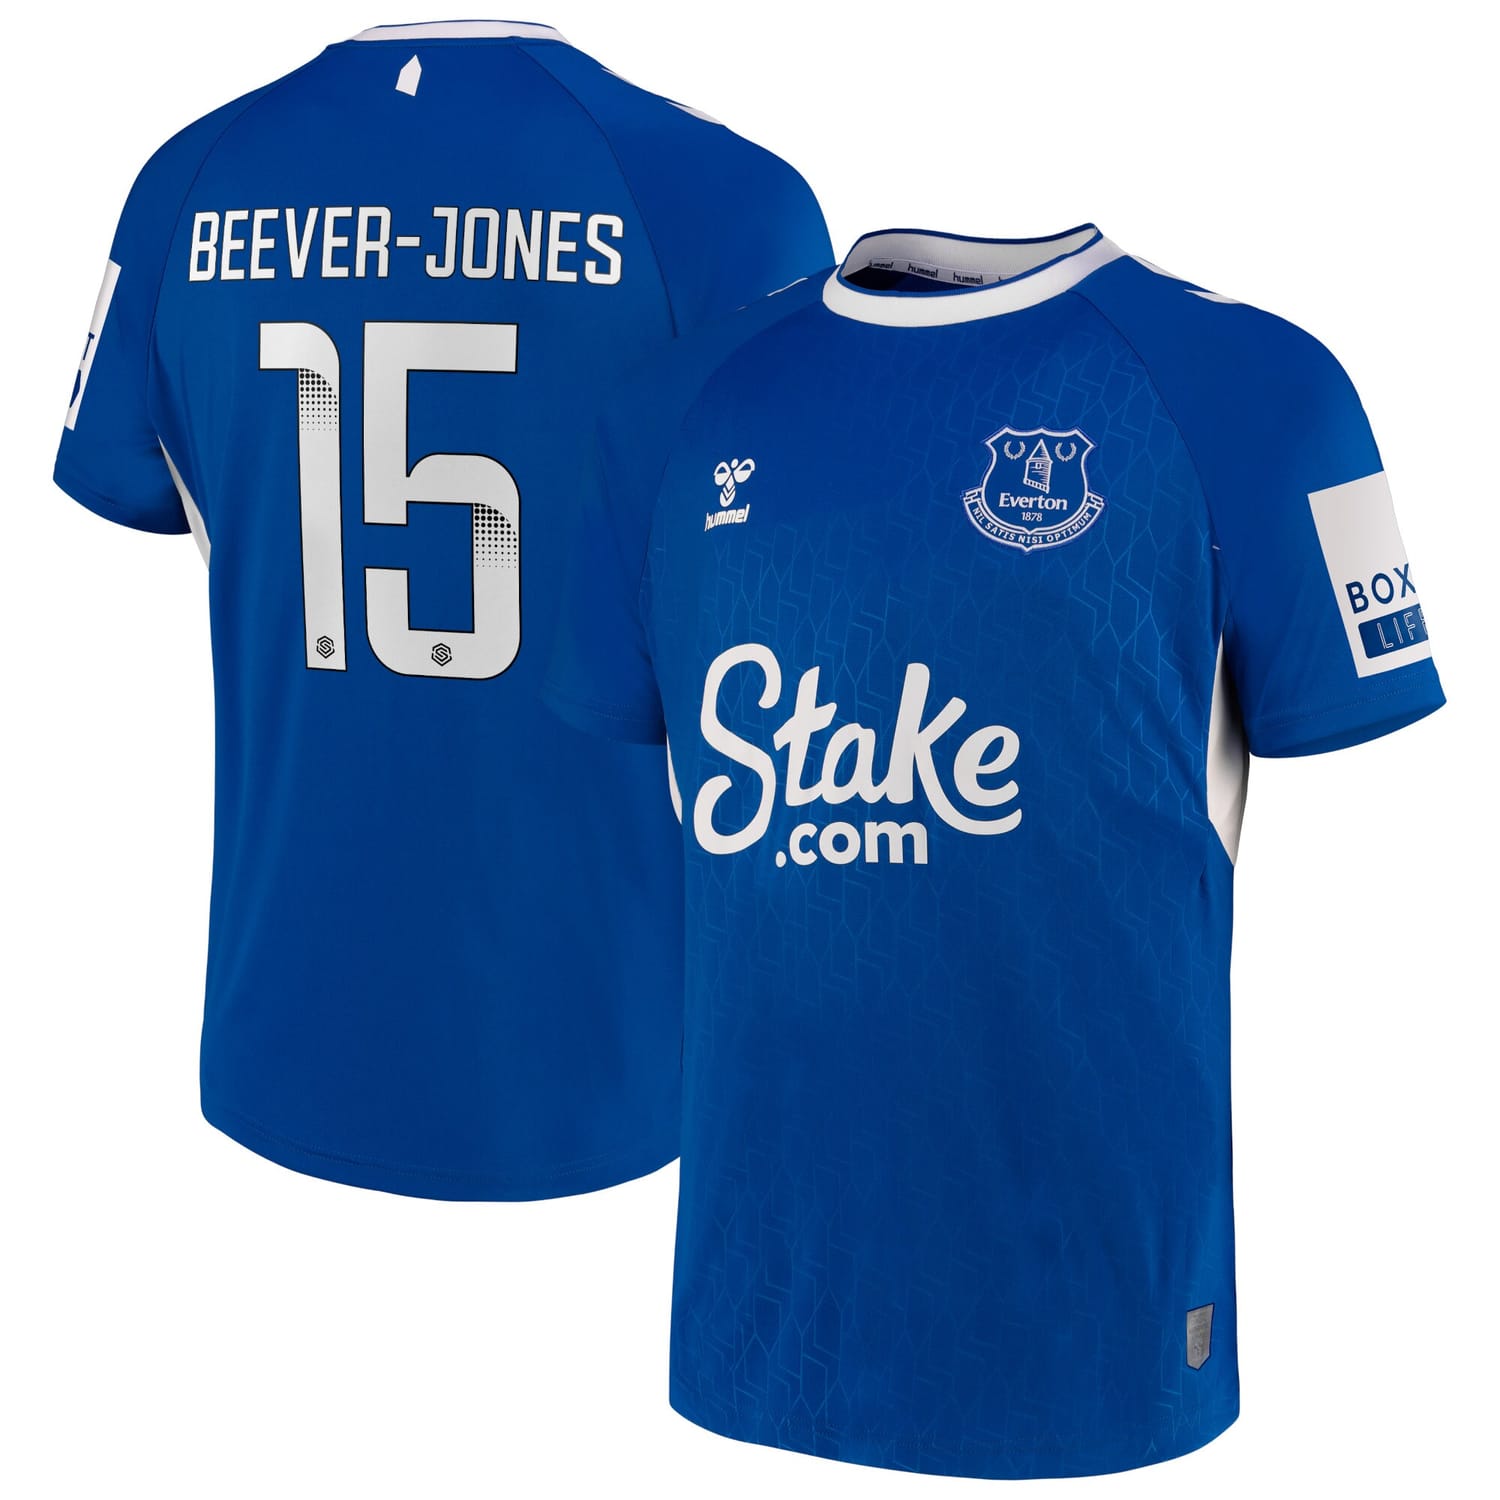 Premier League Everton Home WSL Jersey Shirt 2022-23 player Aggie Beever-Jones 15 printing for Men